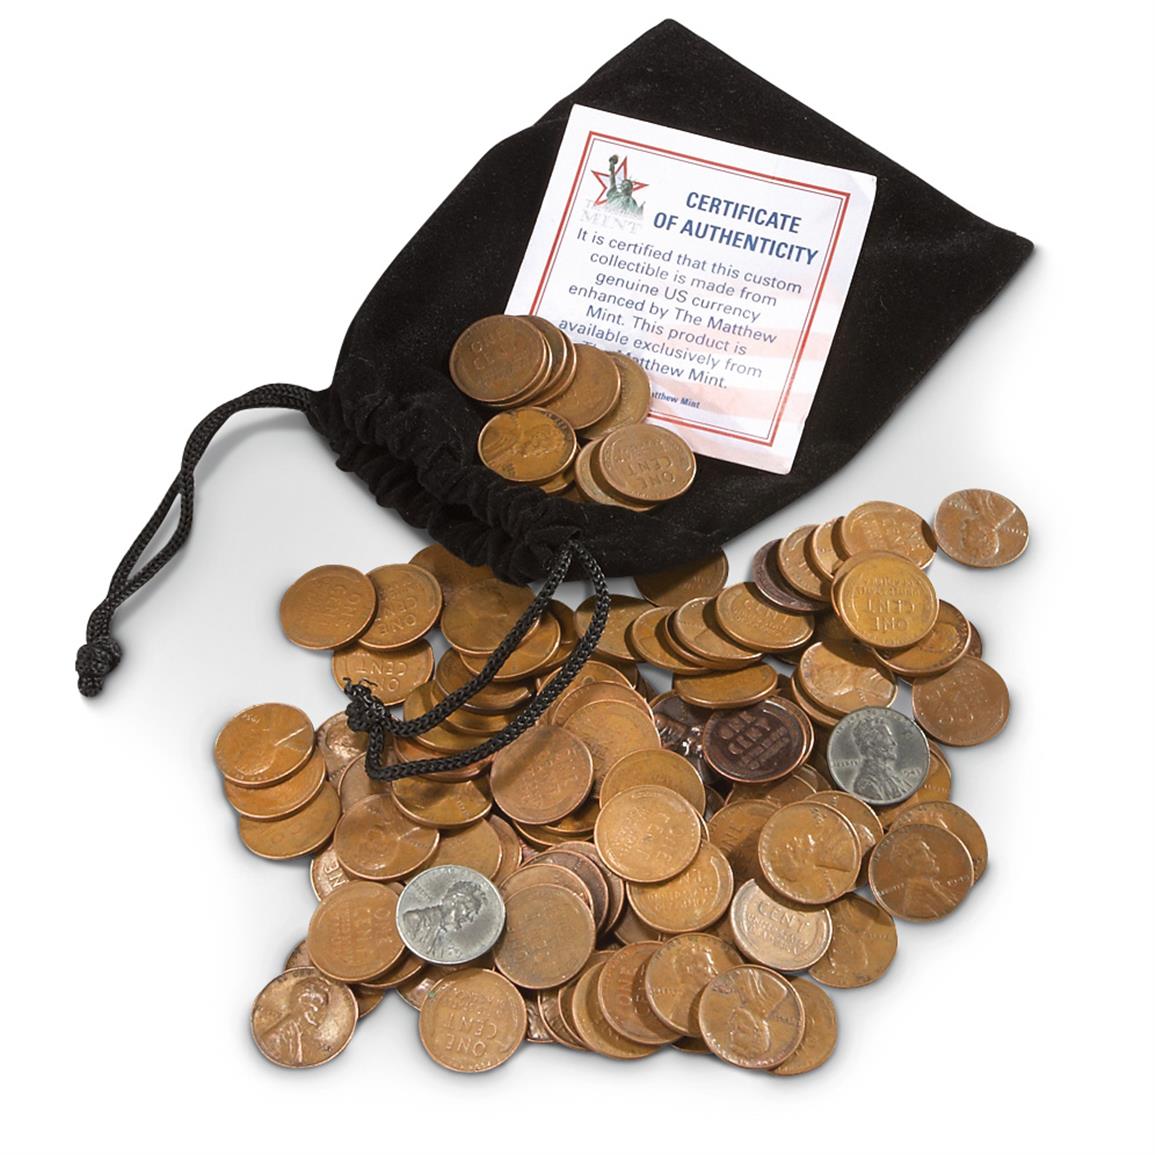 1 Troy-lb. Bag of Wheat Pennies - 618643, Coins, Collectibles ...